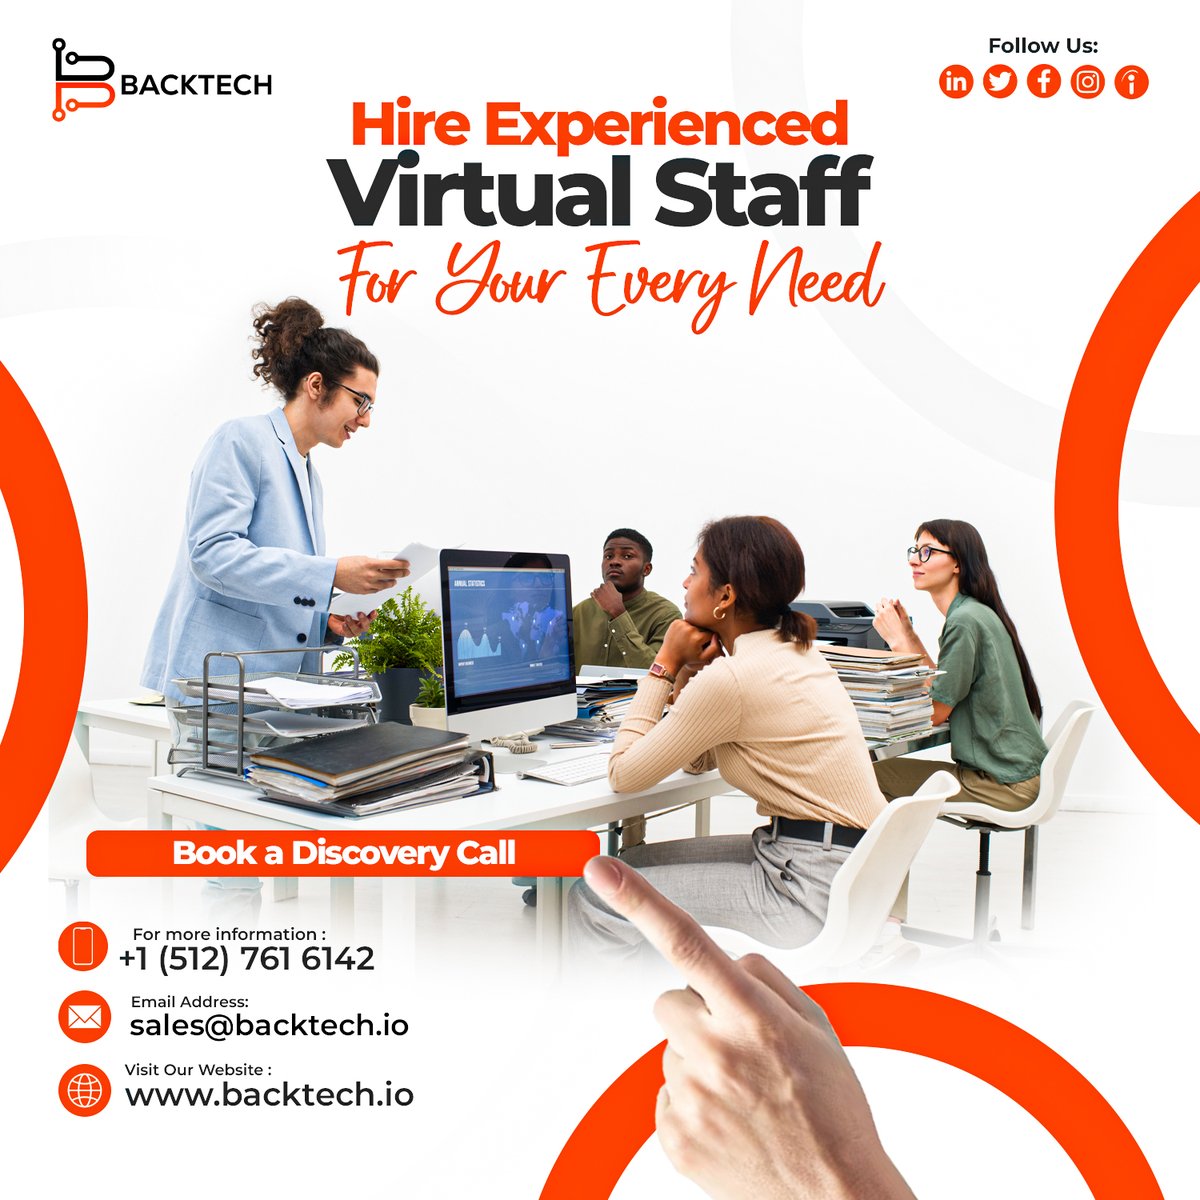 Your needs, our skilled virtual team – the perfect match!  

#staffing #resumes #coverletter #virtualassistant #staffingagency #staffingcompany #remoteassistant #interviews #HRRecruitment #righttalent #rightnow #talent #itstaffing #tempagency #recruiting #recruitingservices